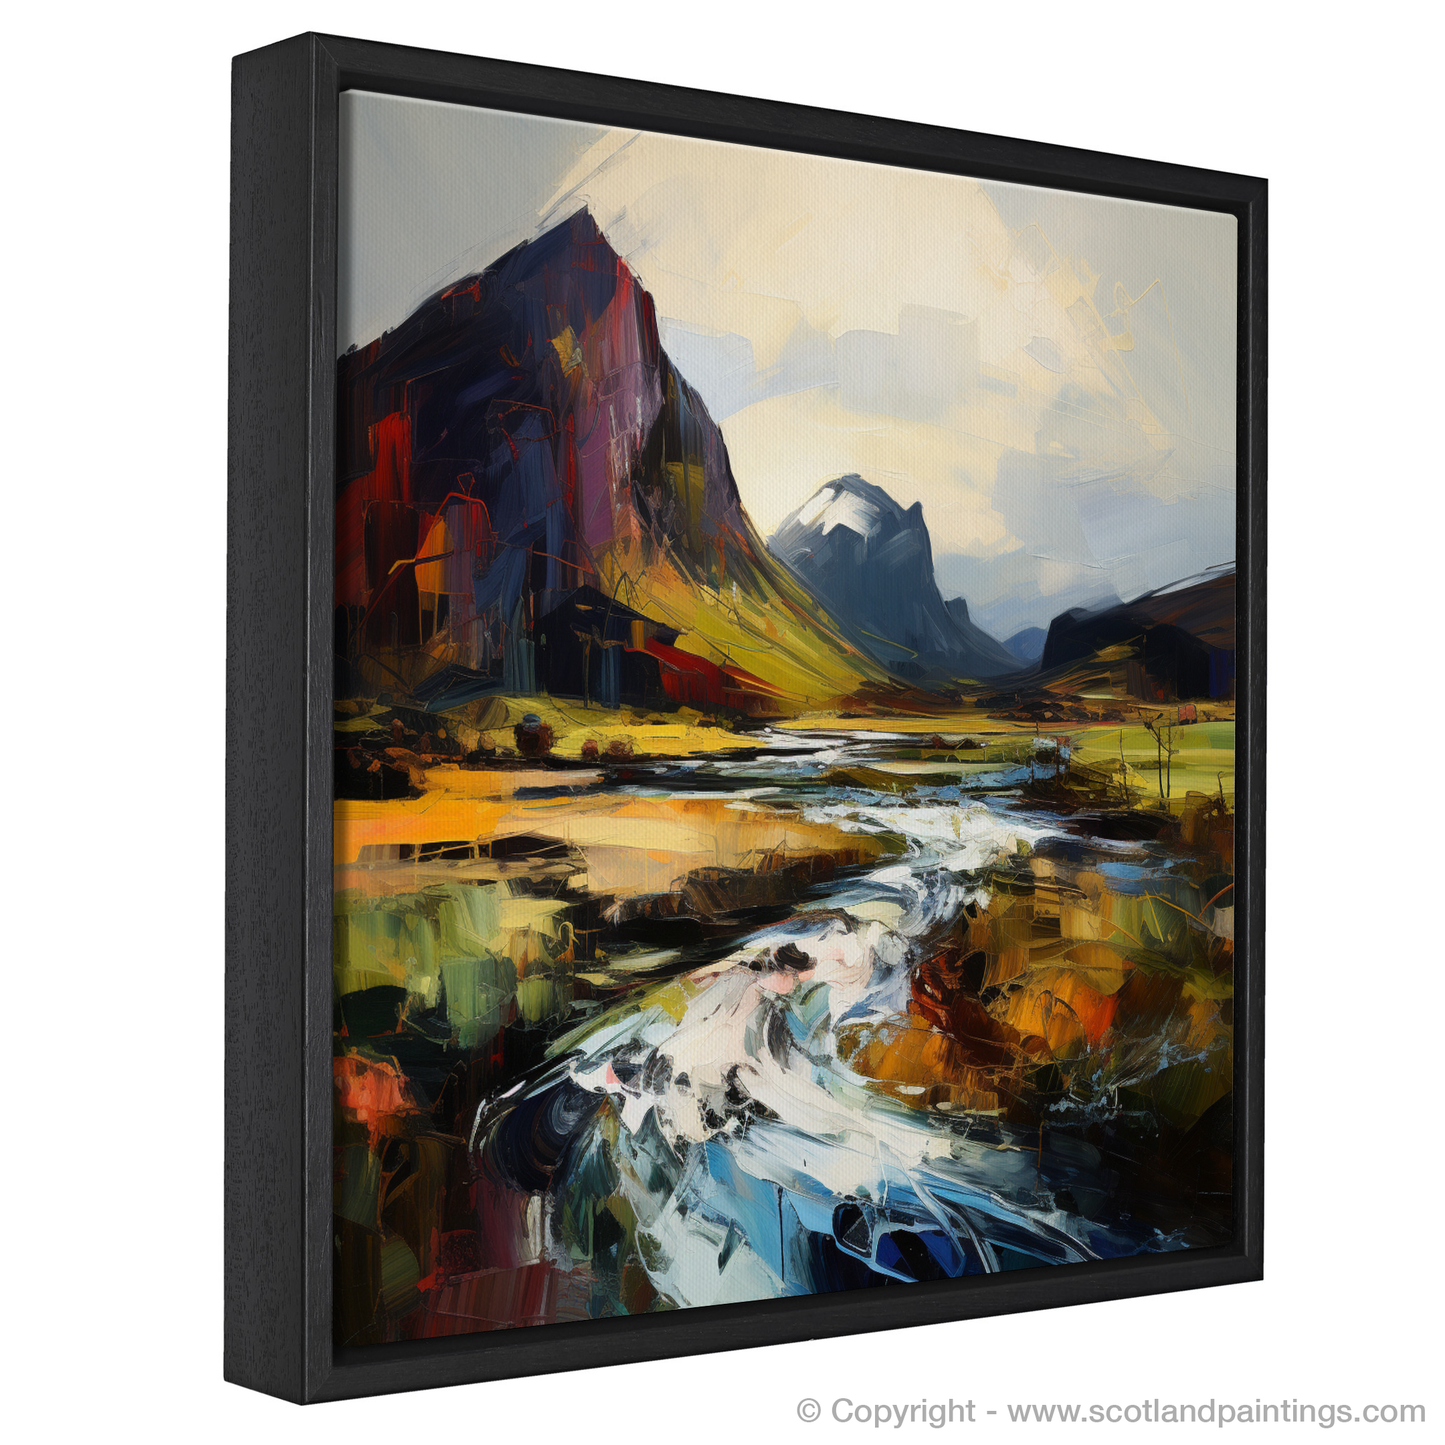 Painting and Art Print of Cruach Àrdrain entitled "Wild Essence of Cruach Àrdrain: An Expressionist Homage to Scotland's Highlands".